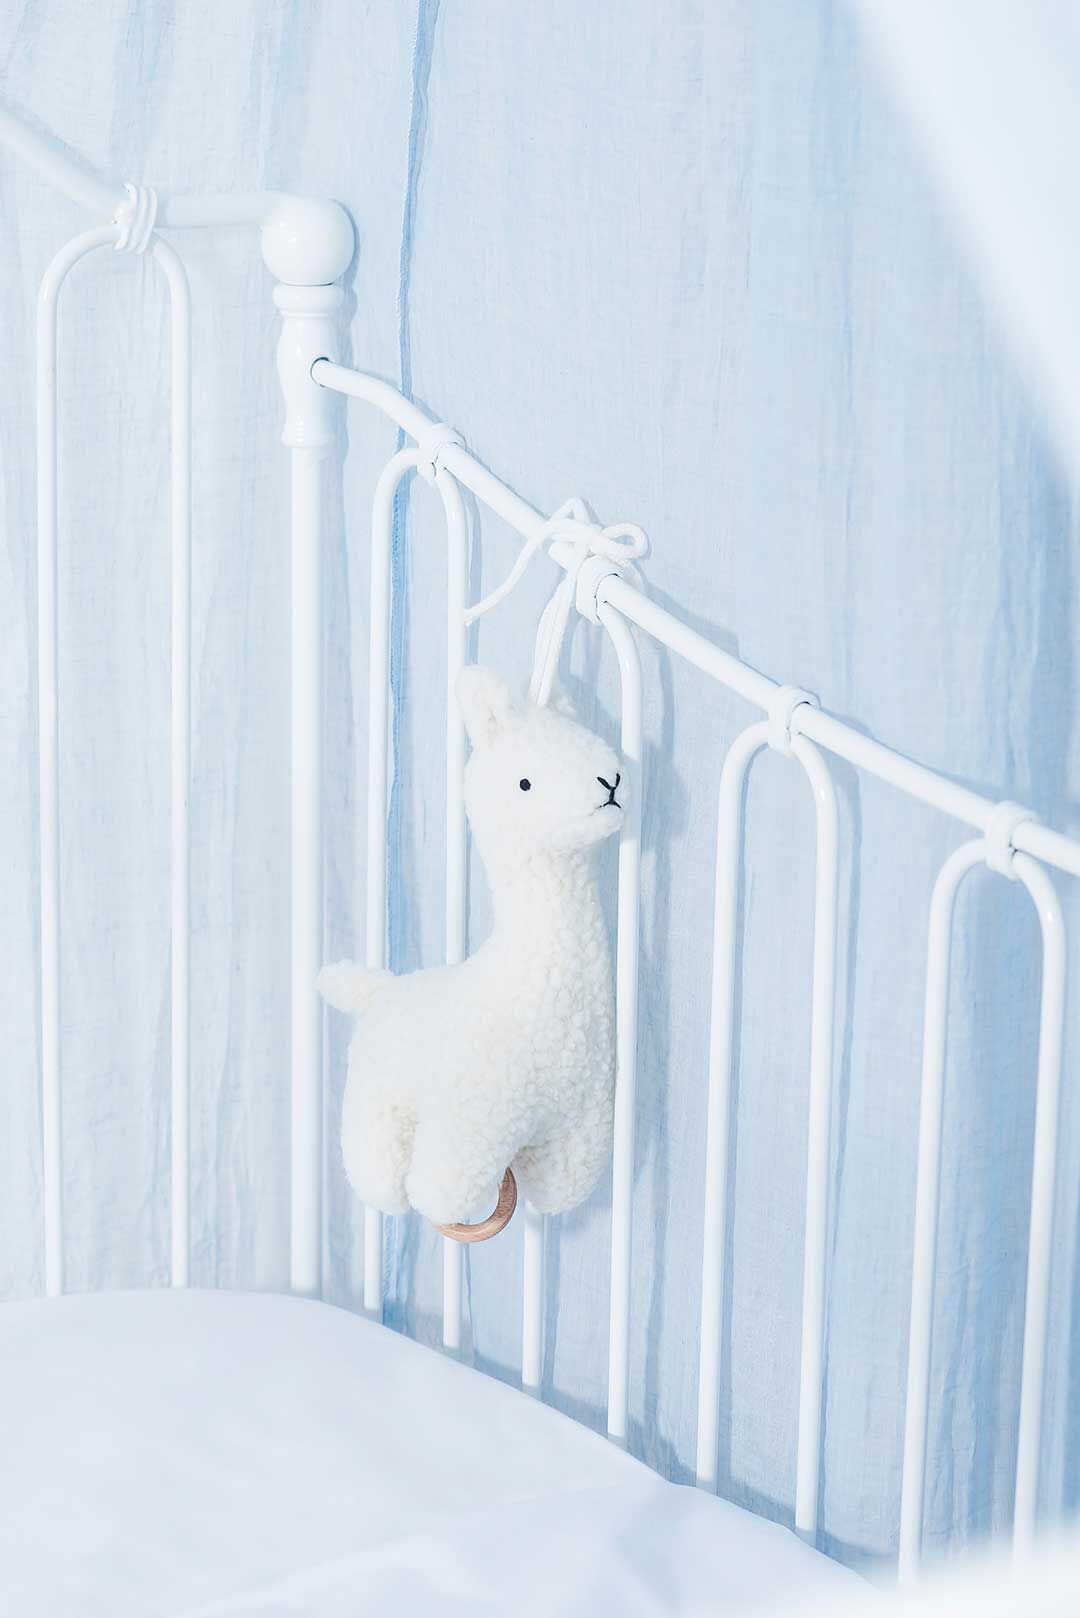 Deer Industries Baby Toy, Jollein Hanger Musical Llama Off White, Llama Accessories Babies, Musical Toy for babies